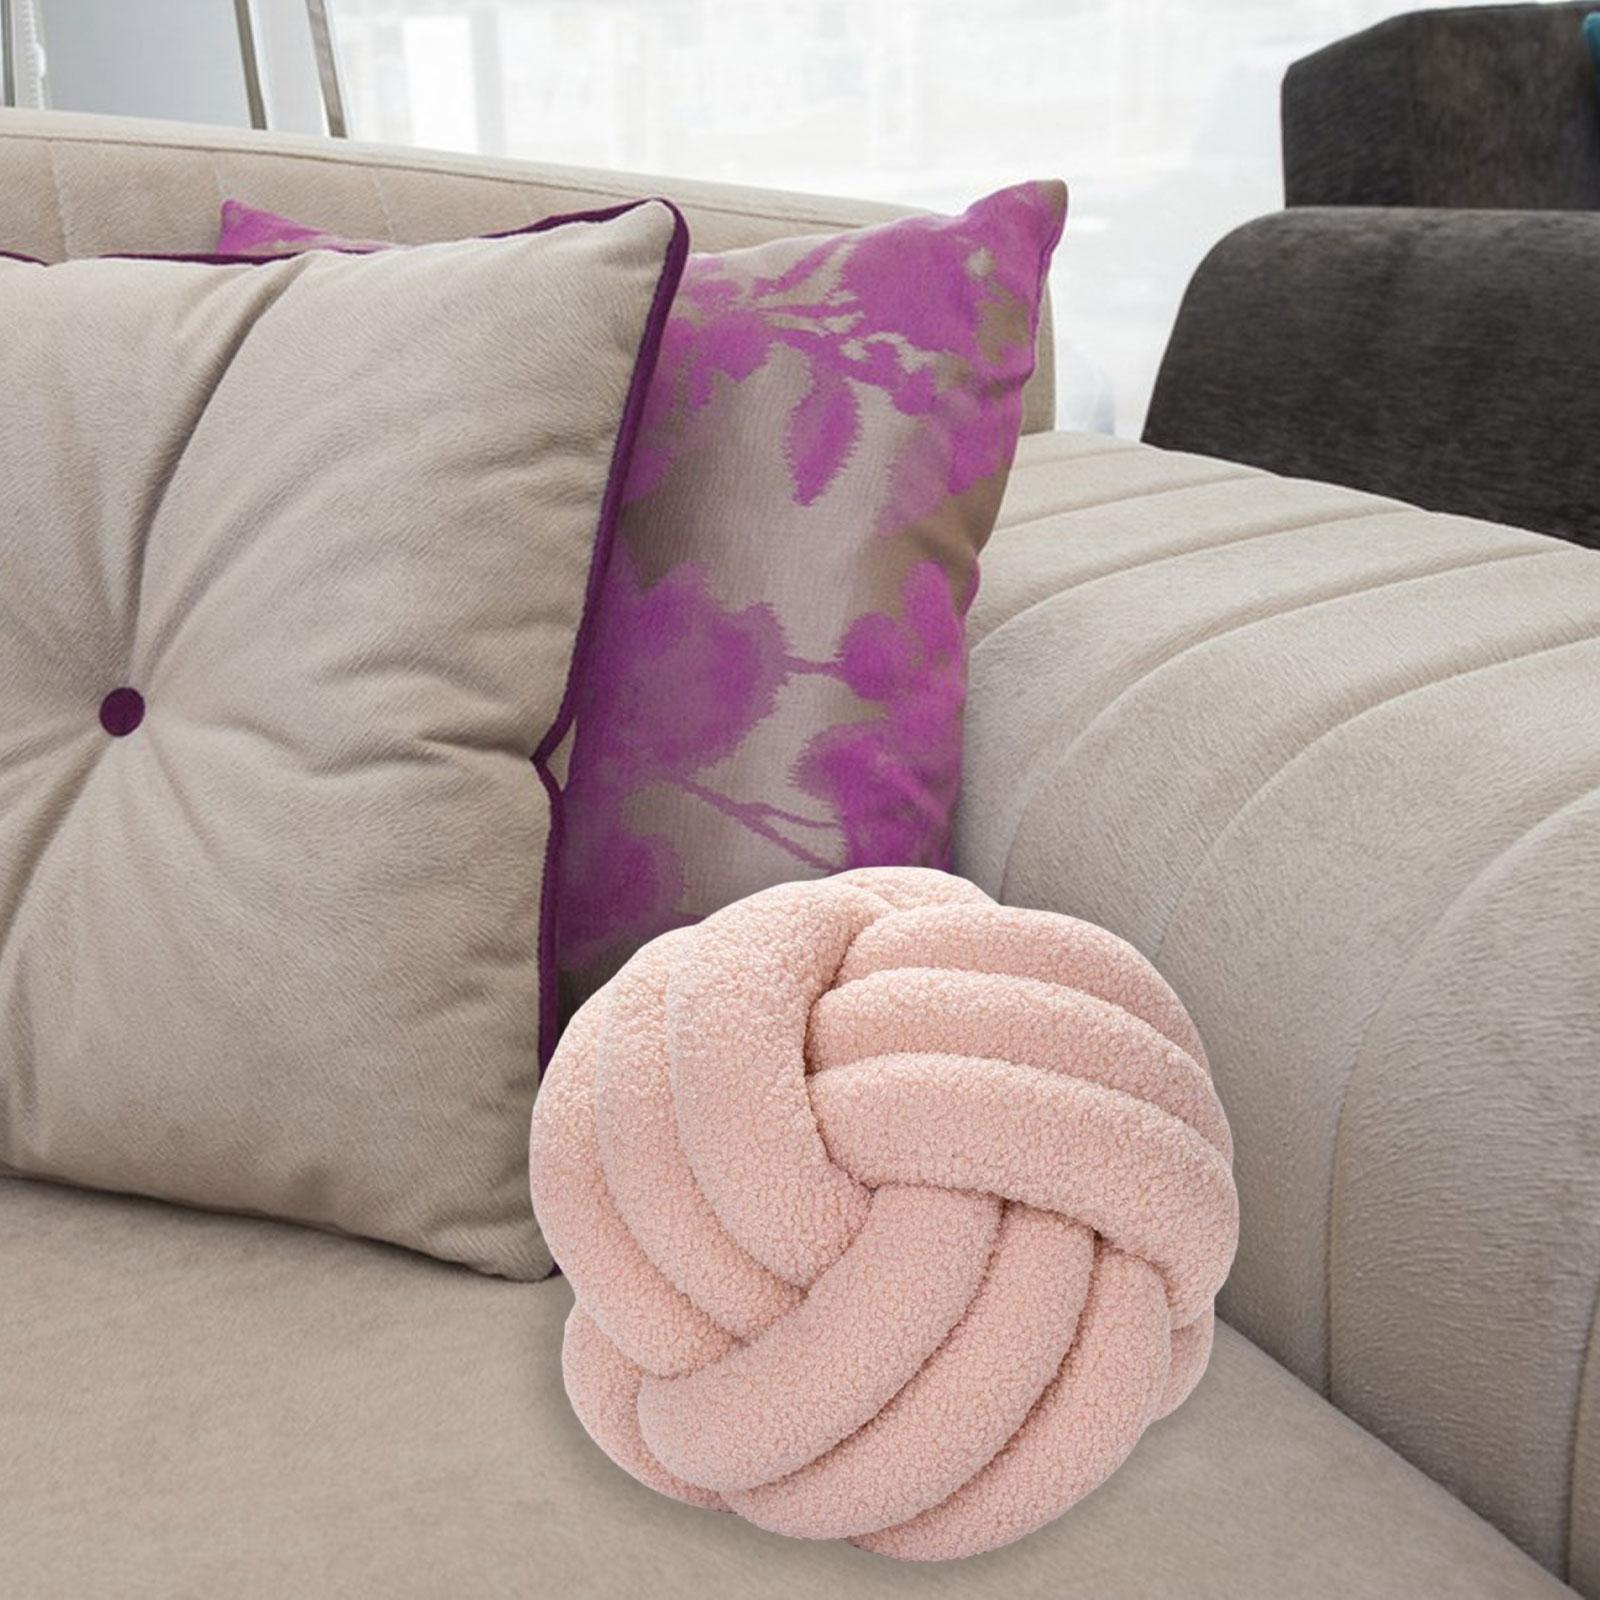 Plush Knot Ball Pillow Diameter 22cm Room Decoration for sofa Couch Light Pink